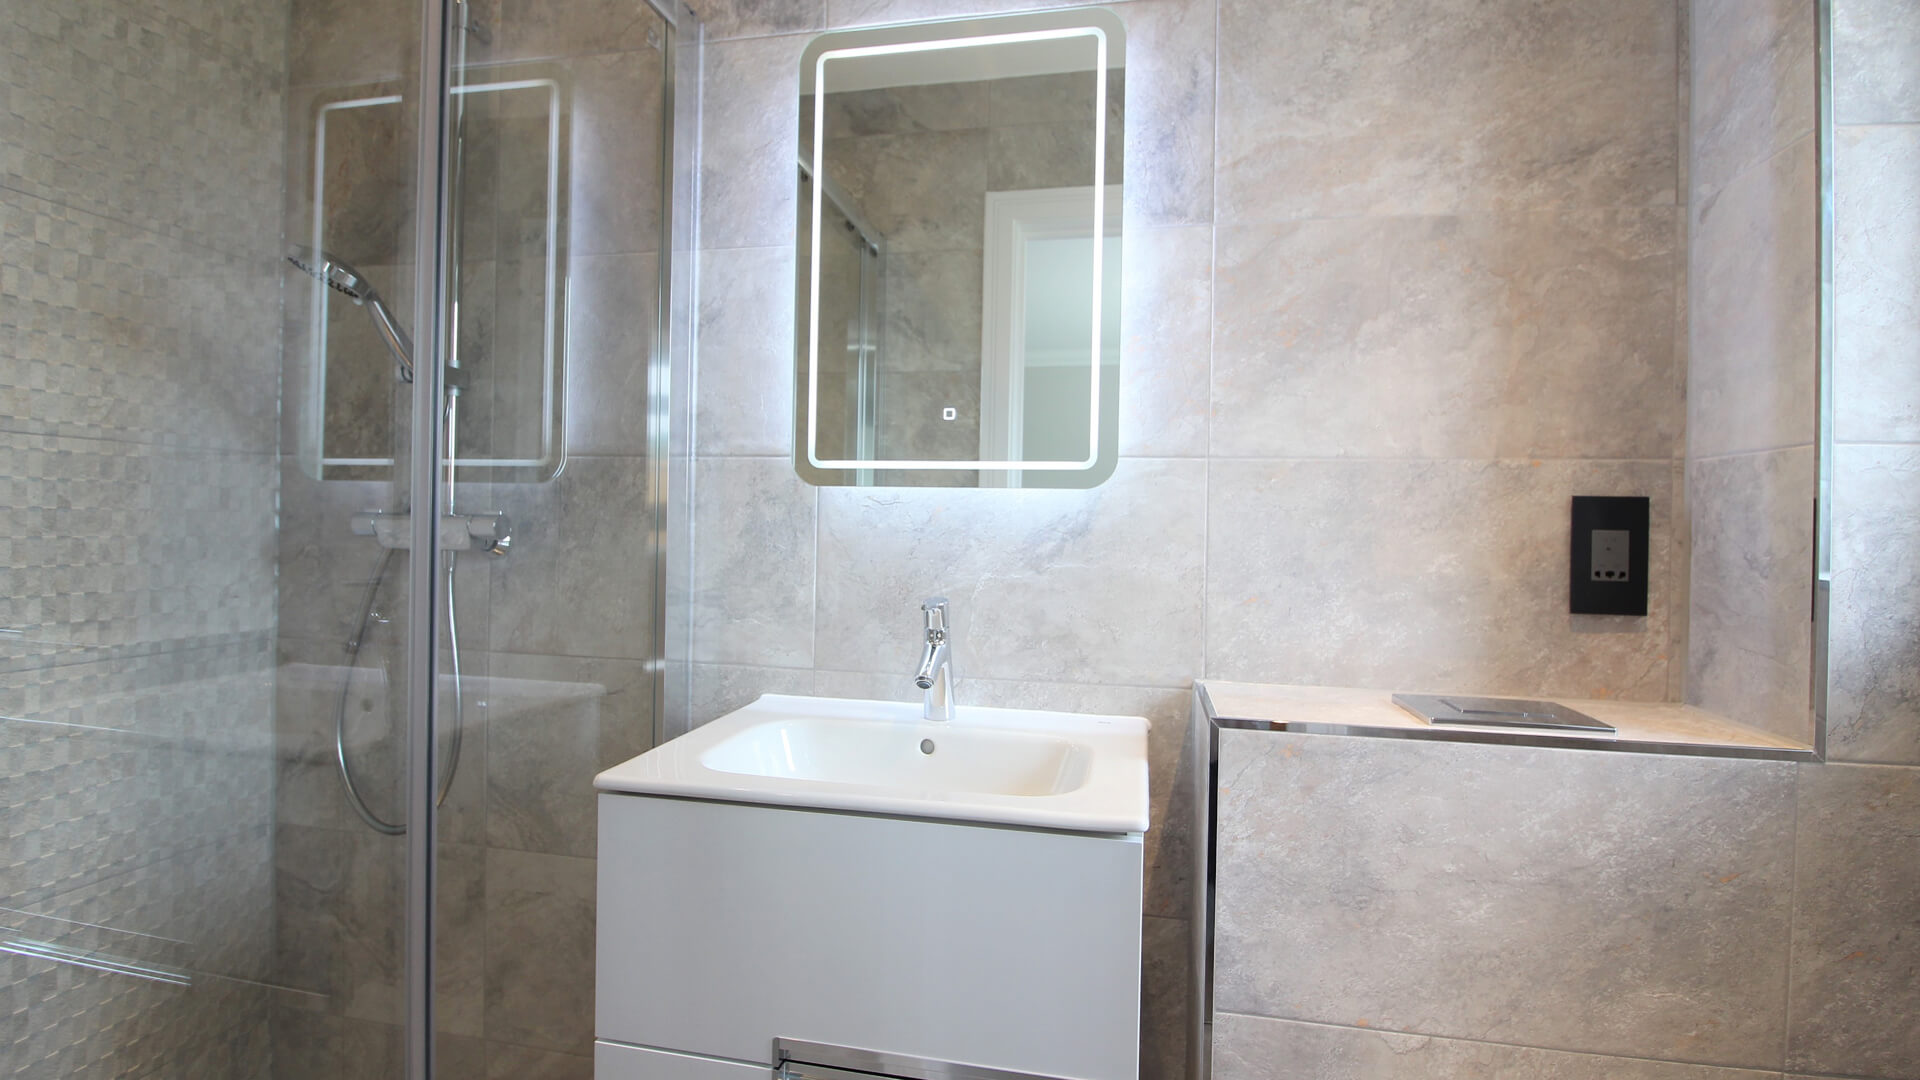 Ensuite with illuminated mirror at Woodside court.